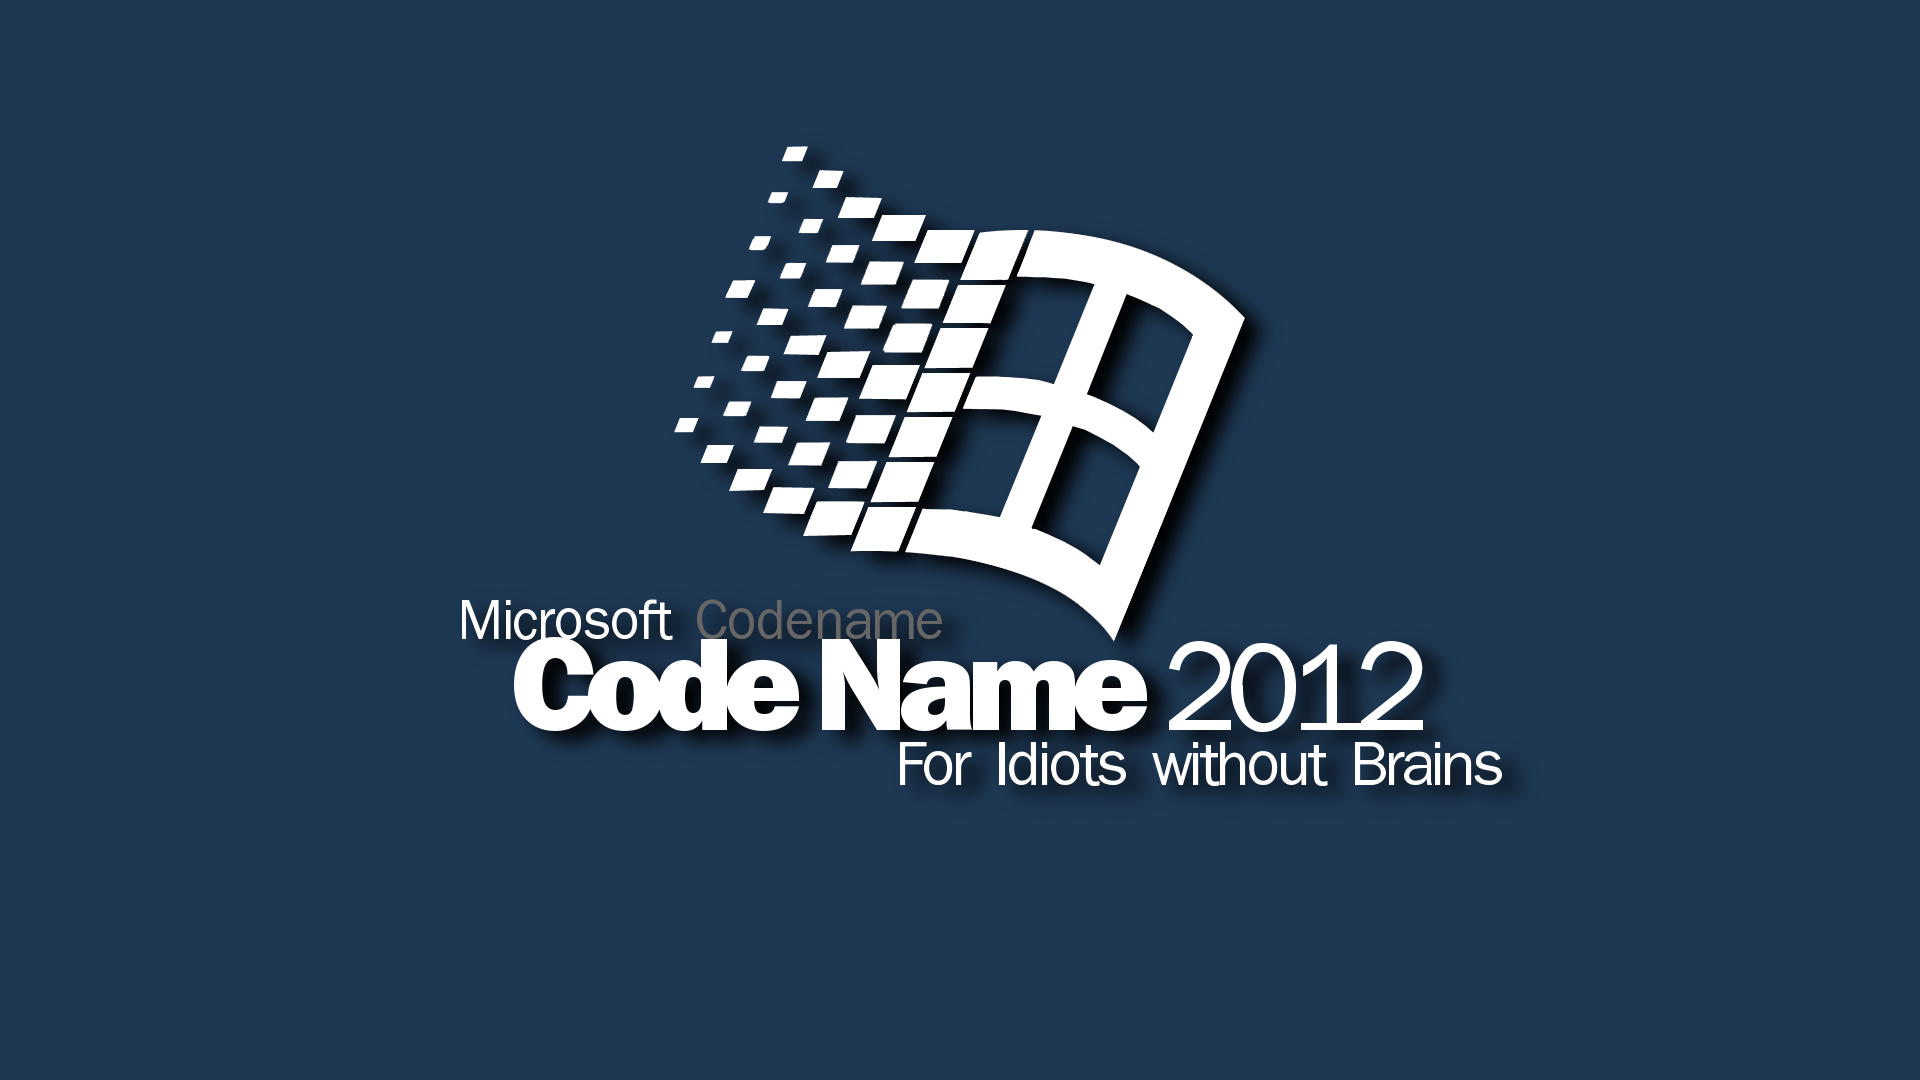 Microsoft Codename Code Name For Idiots Without Brains